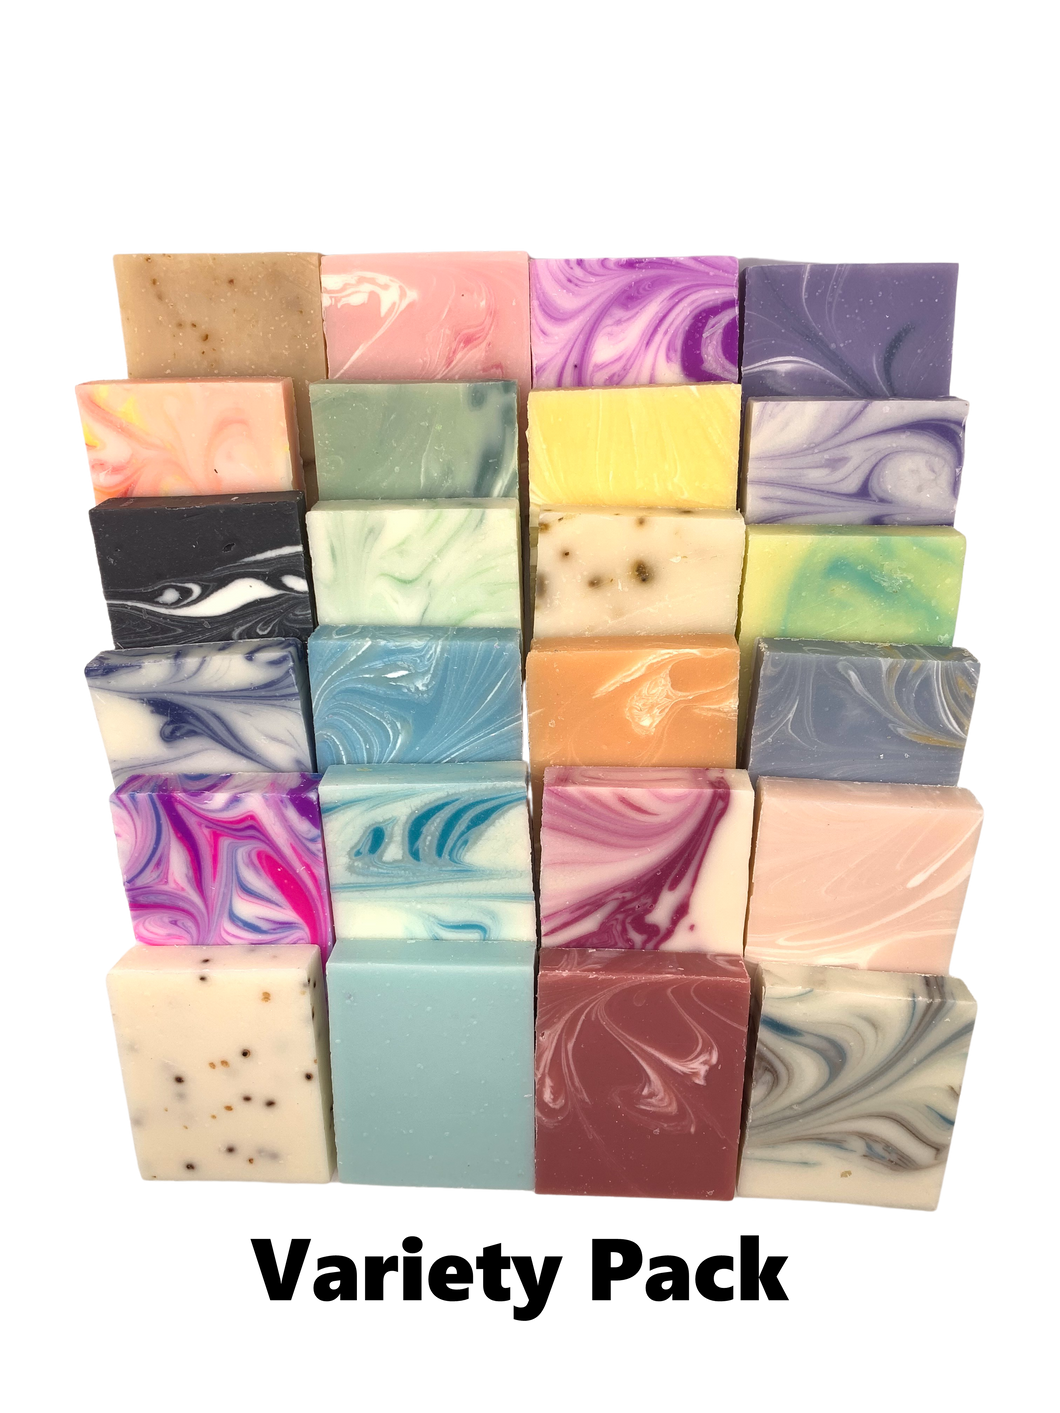 100 Unwrapped mini soaps - assorted or your choice of colors